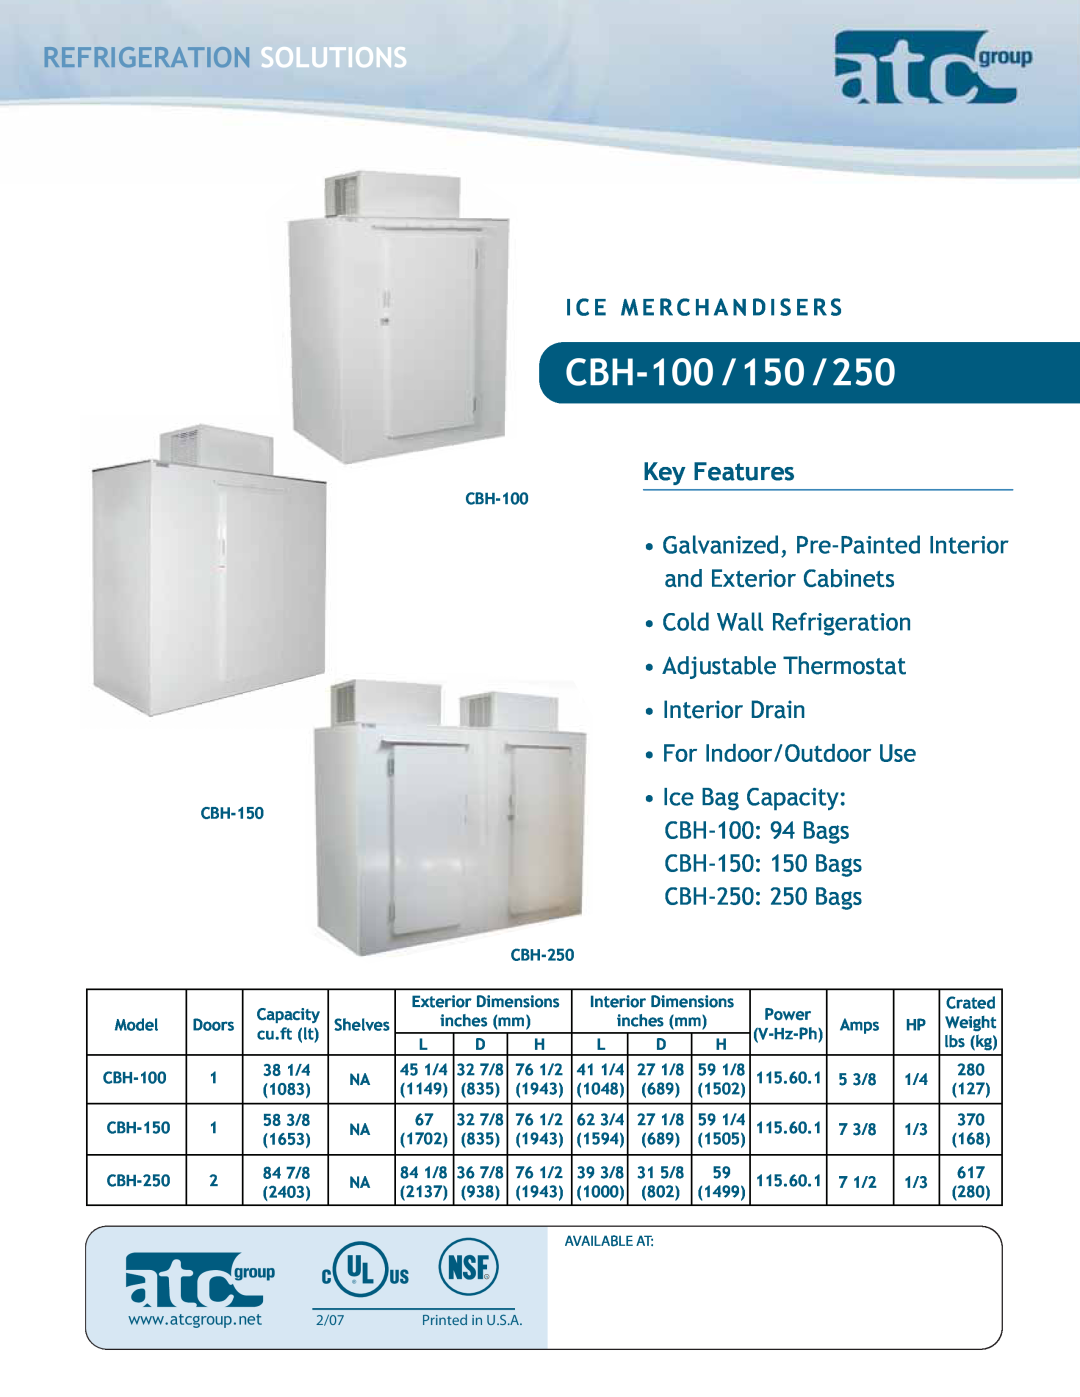 ATC Group CBH-150 dimensions Refrigeration Solutions, CBH-100 /150 /250, Key Features, Ice Bag Capacity CBH-100 94 Bags 